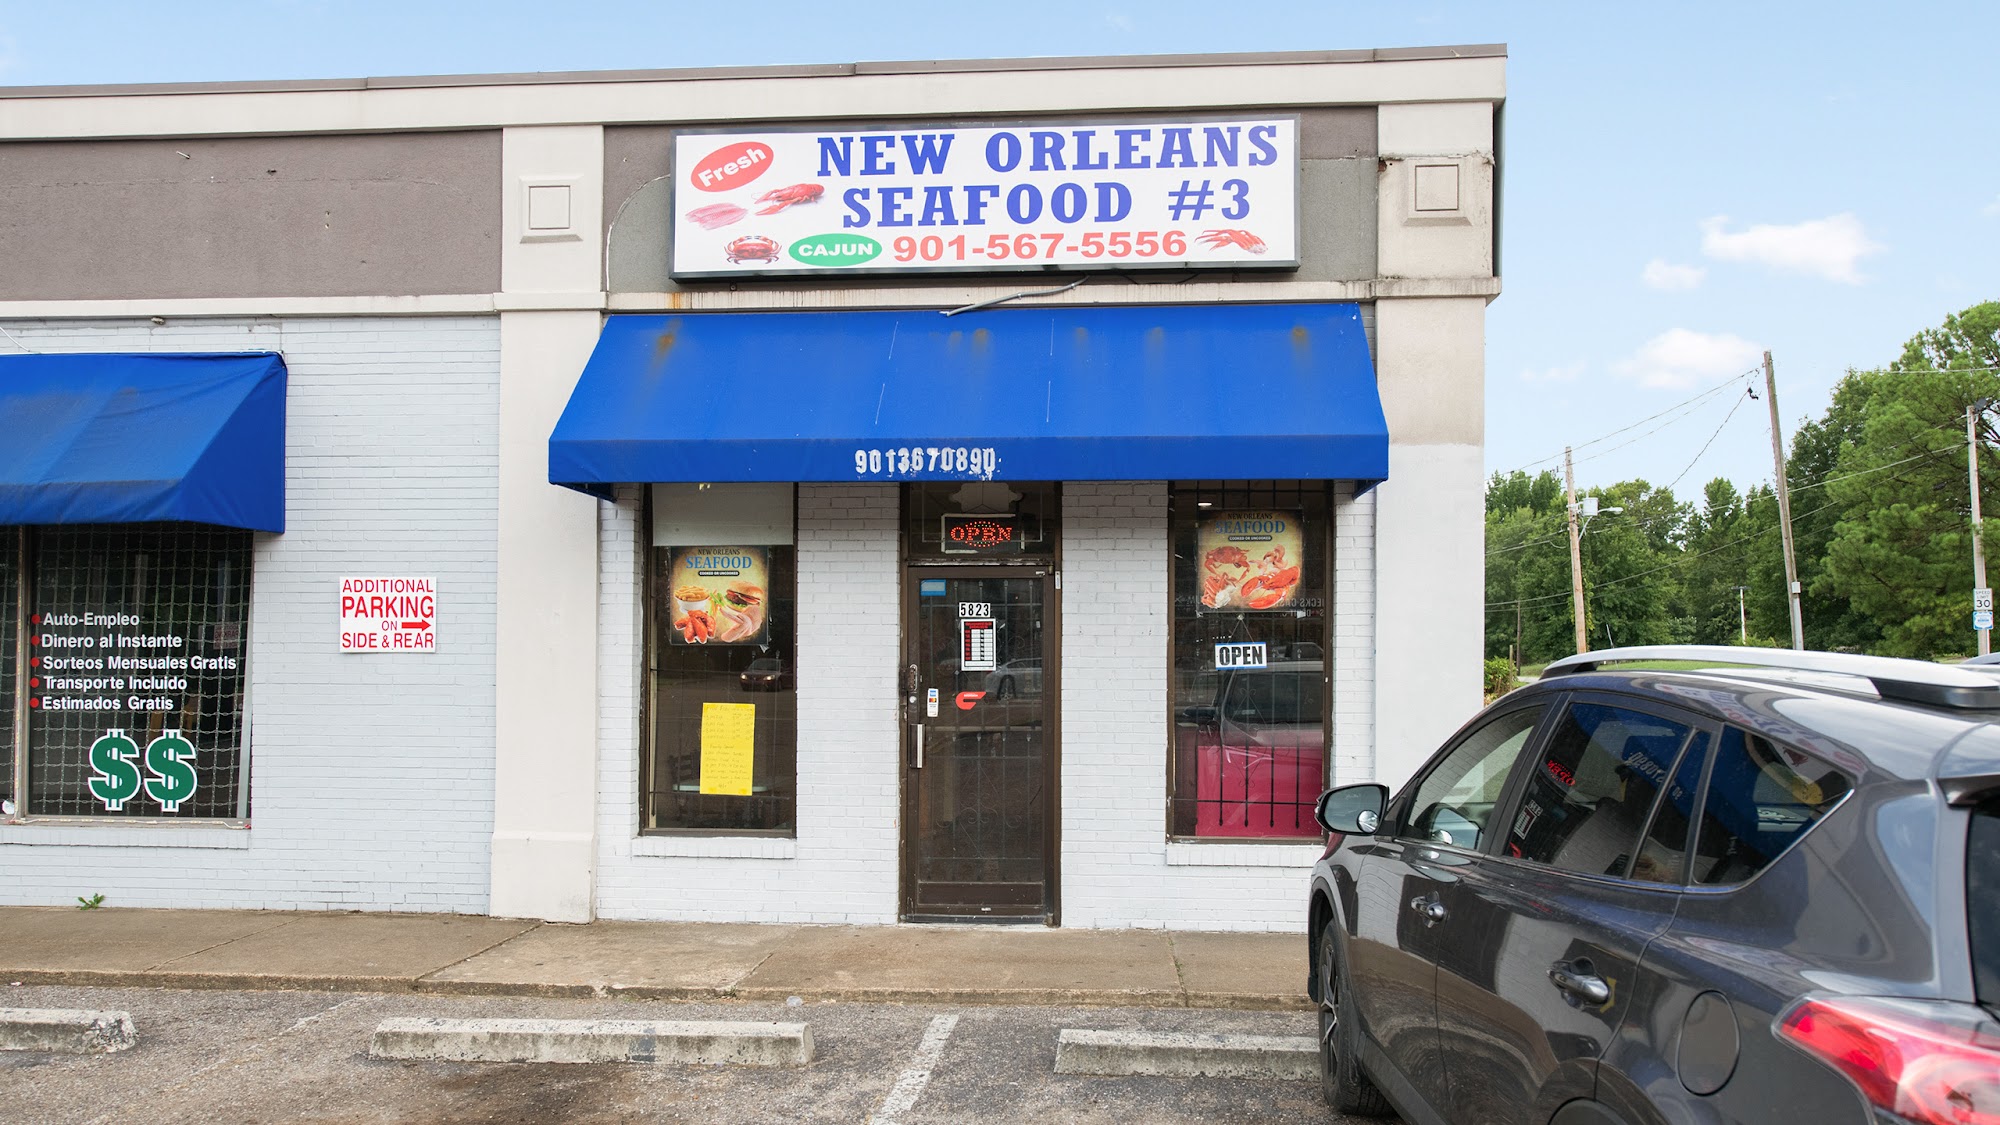 New Orleans Seafood #3